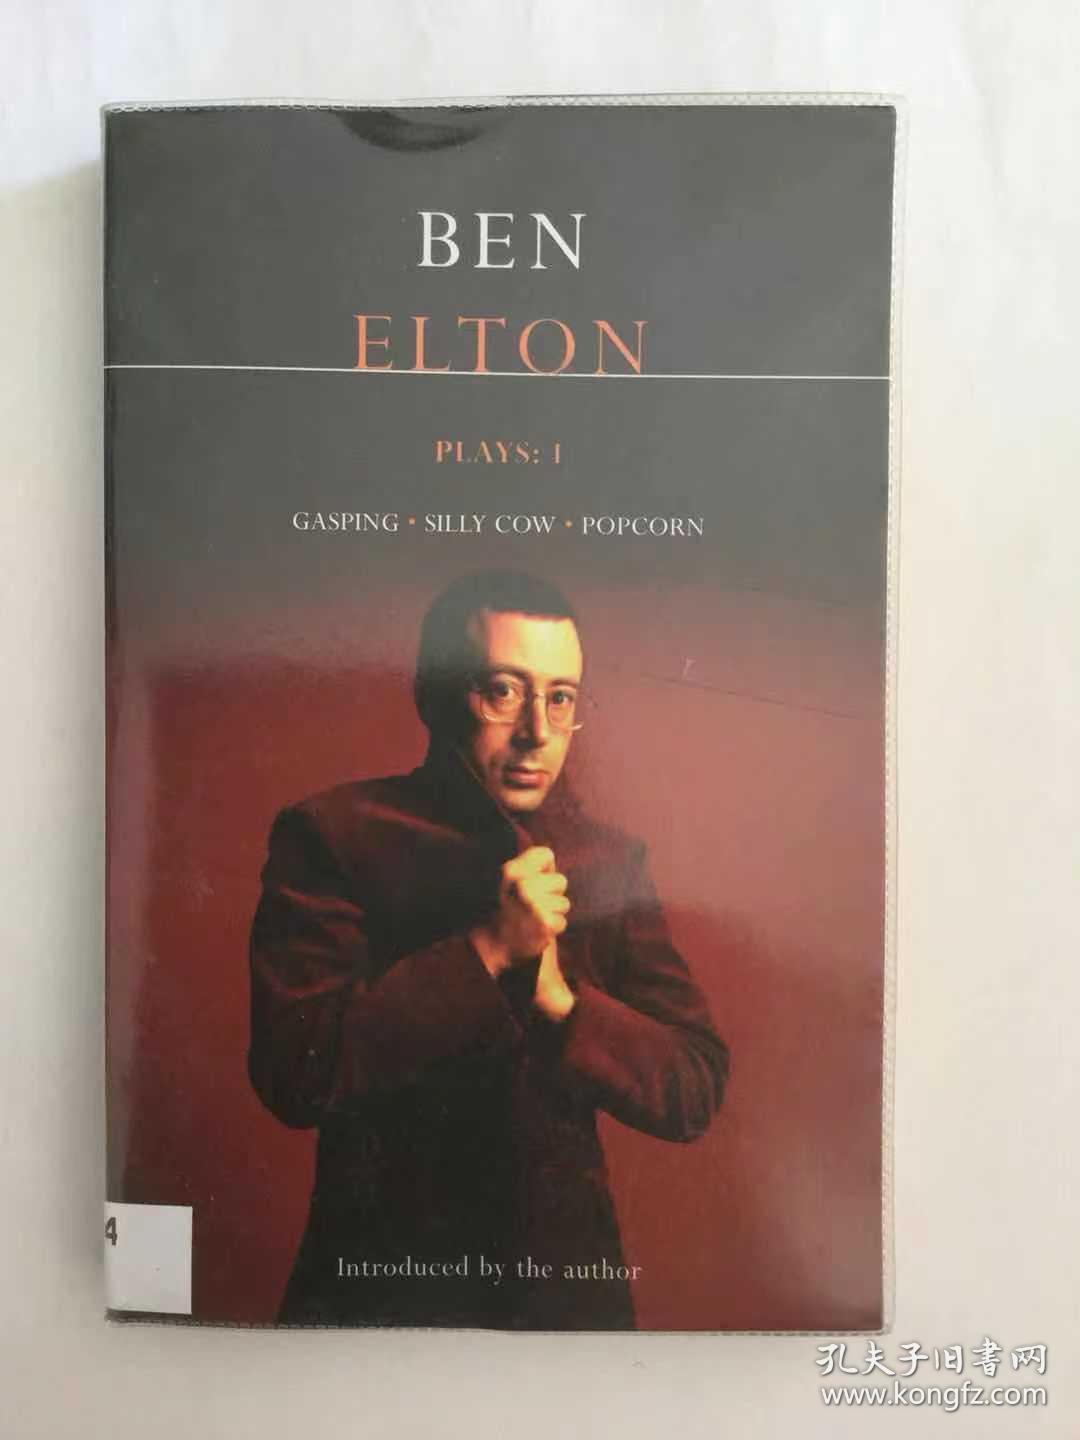 Ben Elton Plays: 1: Gasping; Silly Cow; Popcorn